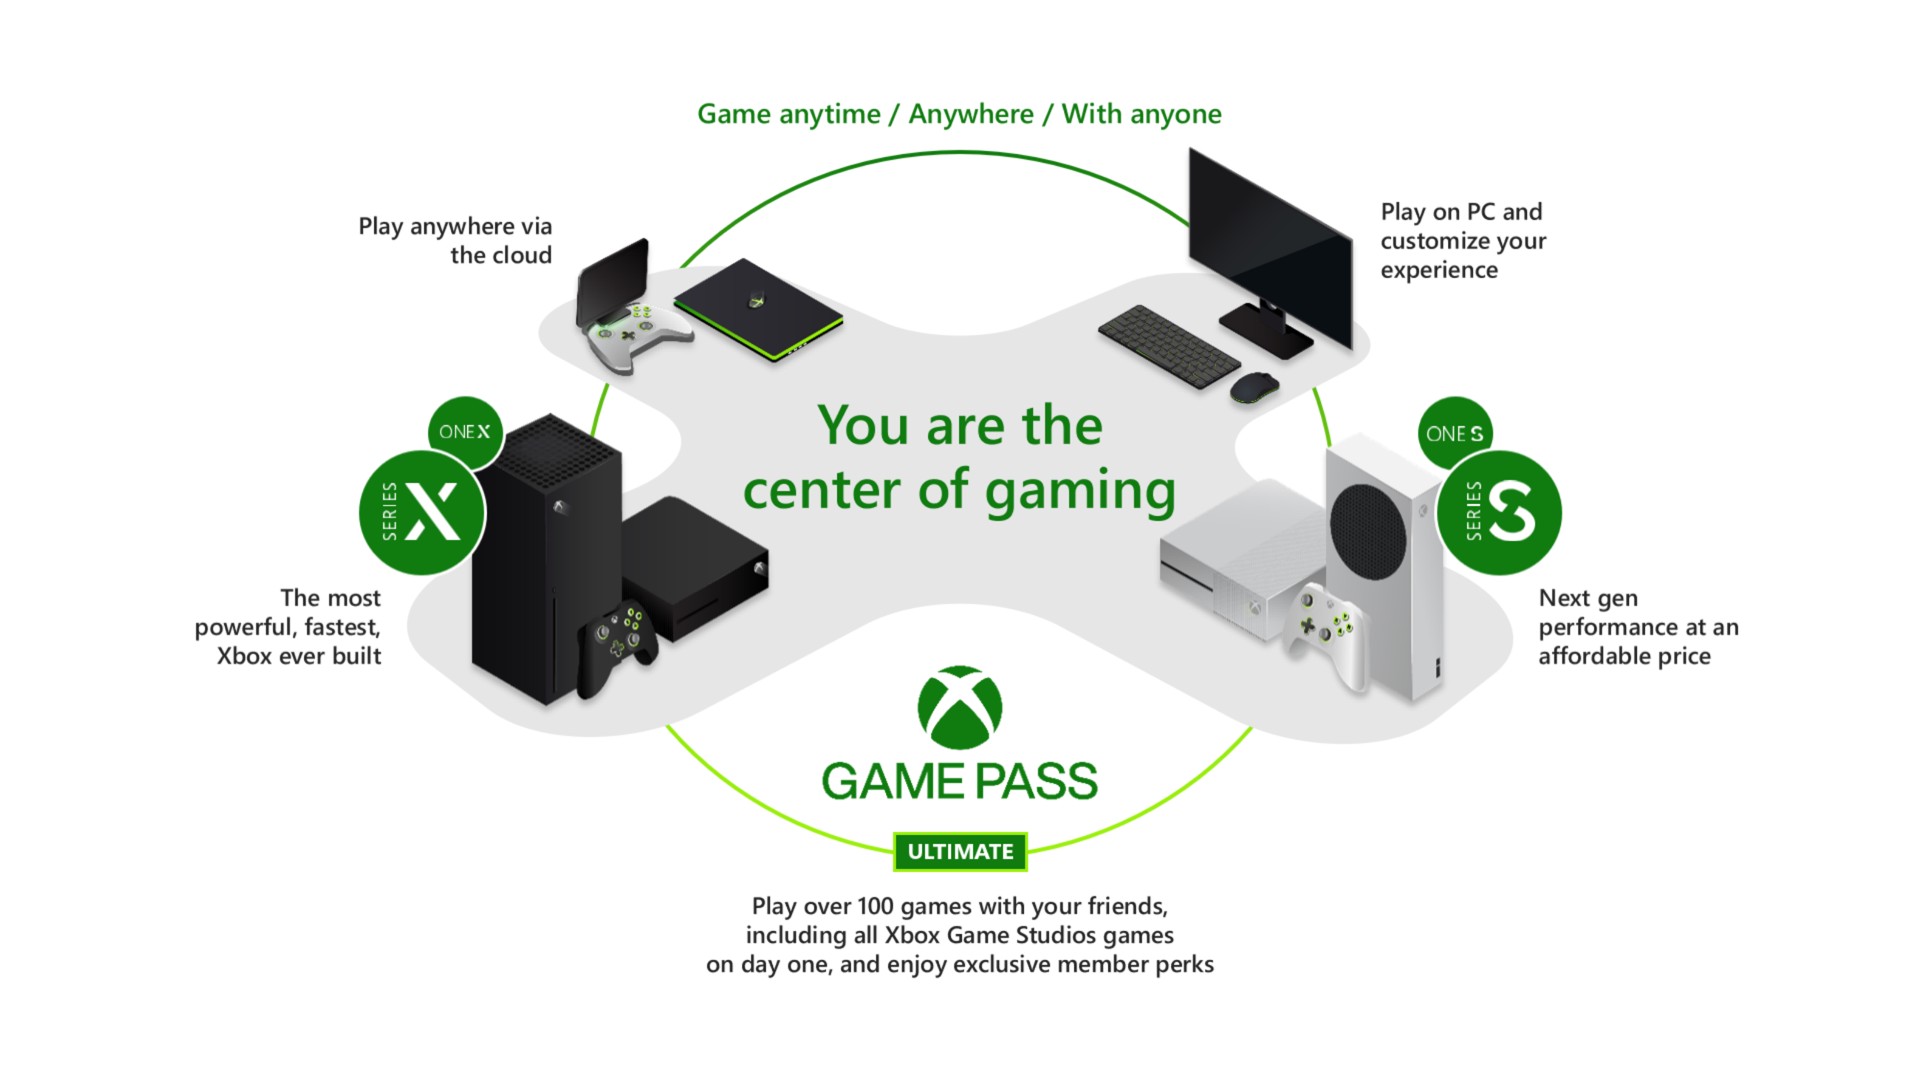 play anywhere via the cloud the most powerful ever built game anywhere with anyone you are the center of gaming game pass play over games with your friends including all game studios games on day one and enjoy exclusive member perks play on and your experience next gen performance at an affordable price i | Microsoft